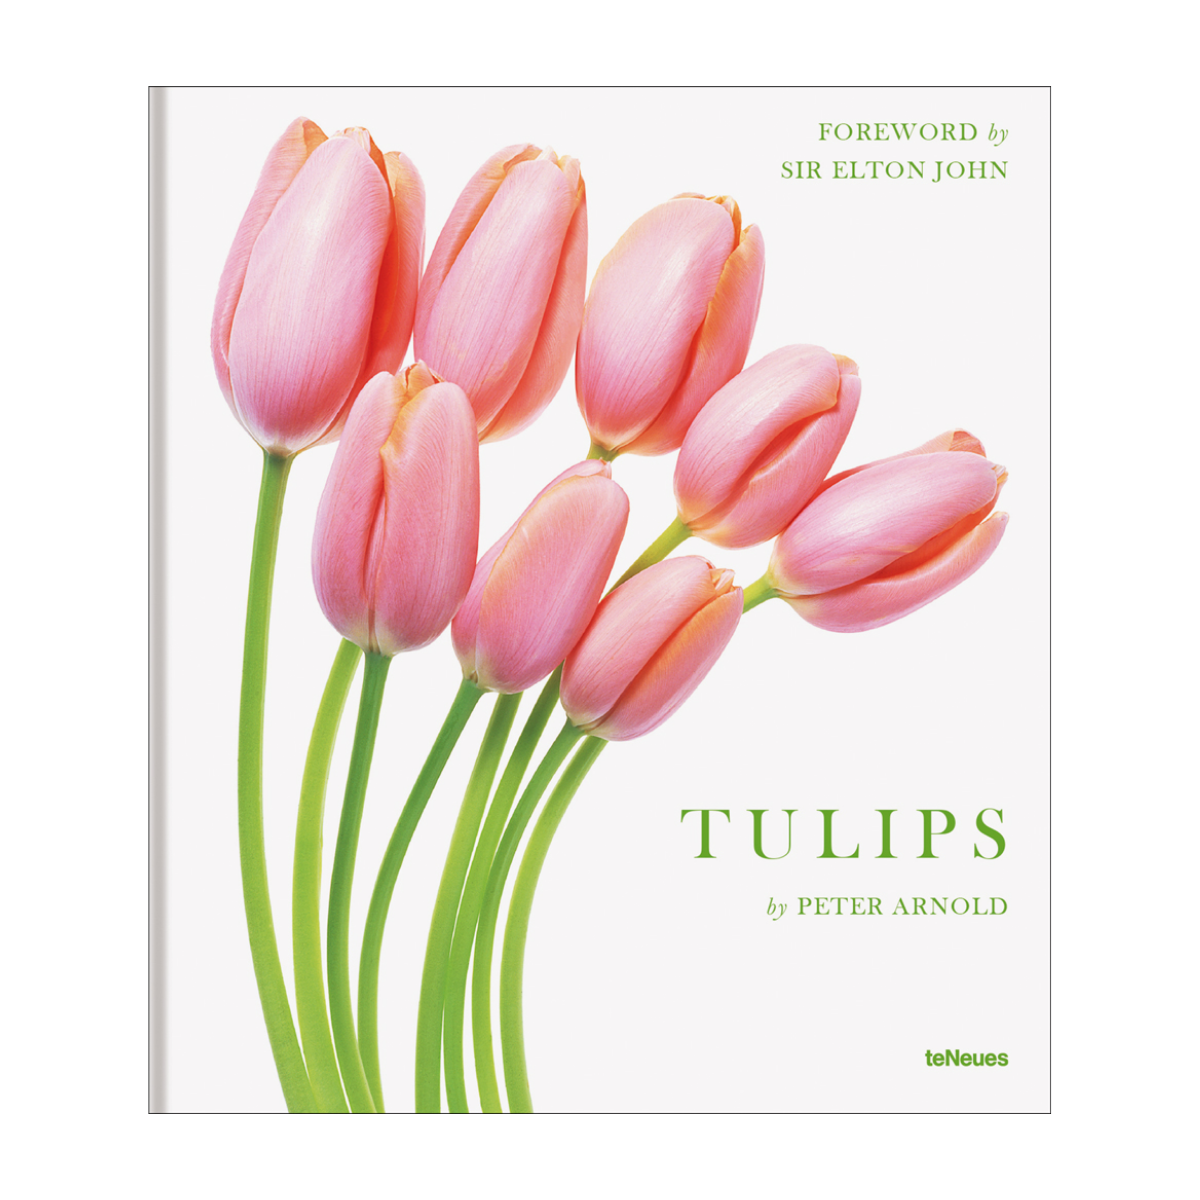 "Tulips - Peter Arnold"